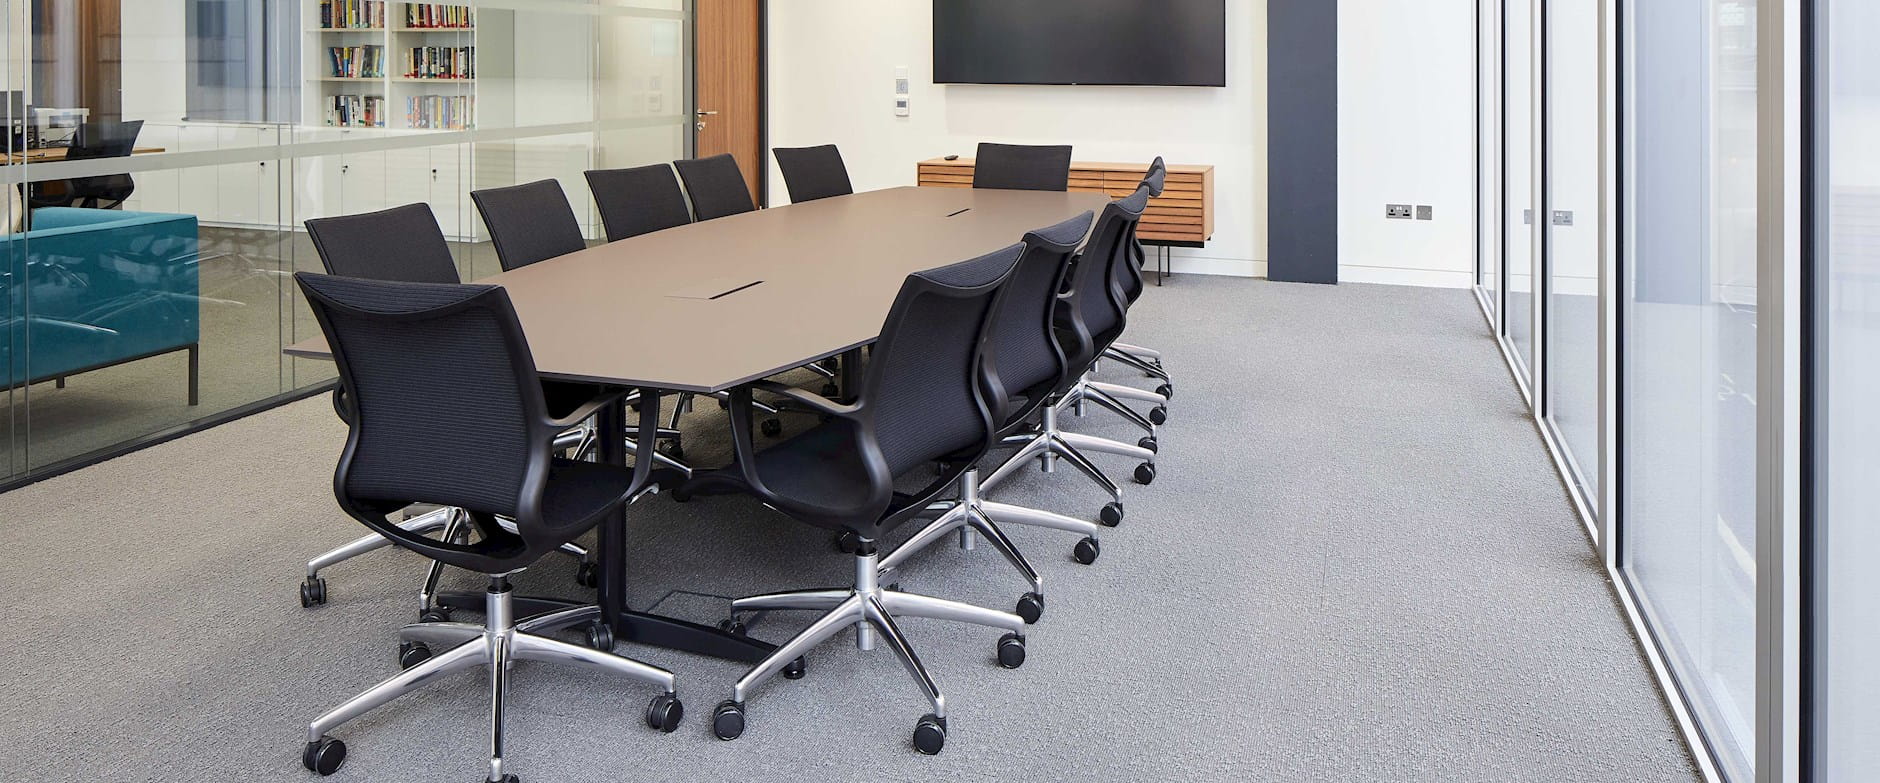 Faculty conference room table with screen on the wall and black chairs around the table